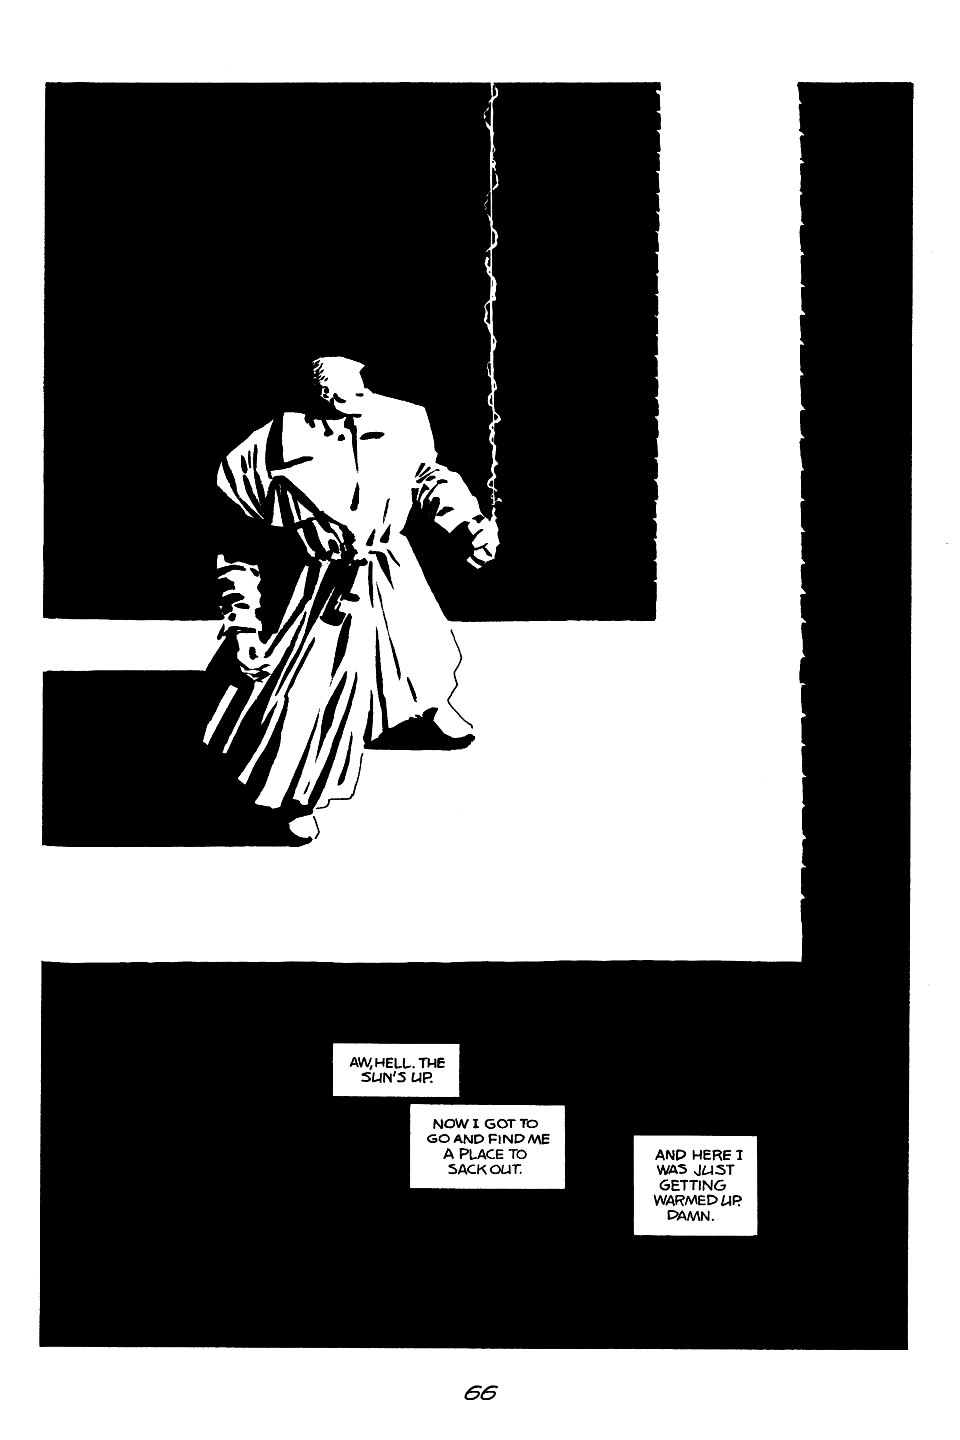 page 66 of sin city 1 the hard goodbye